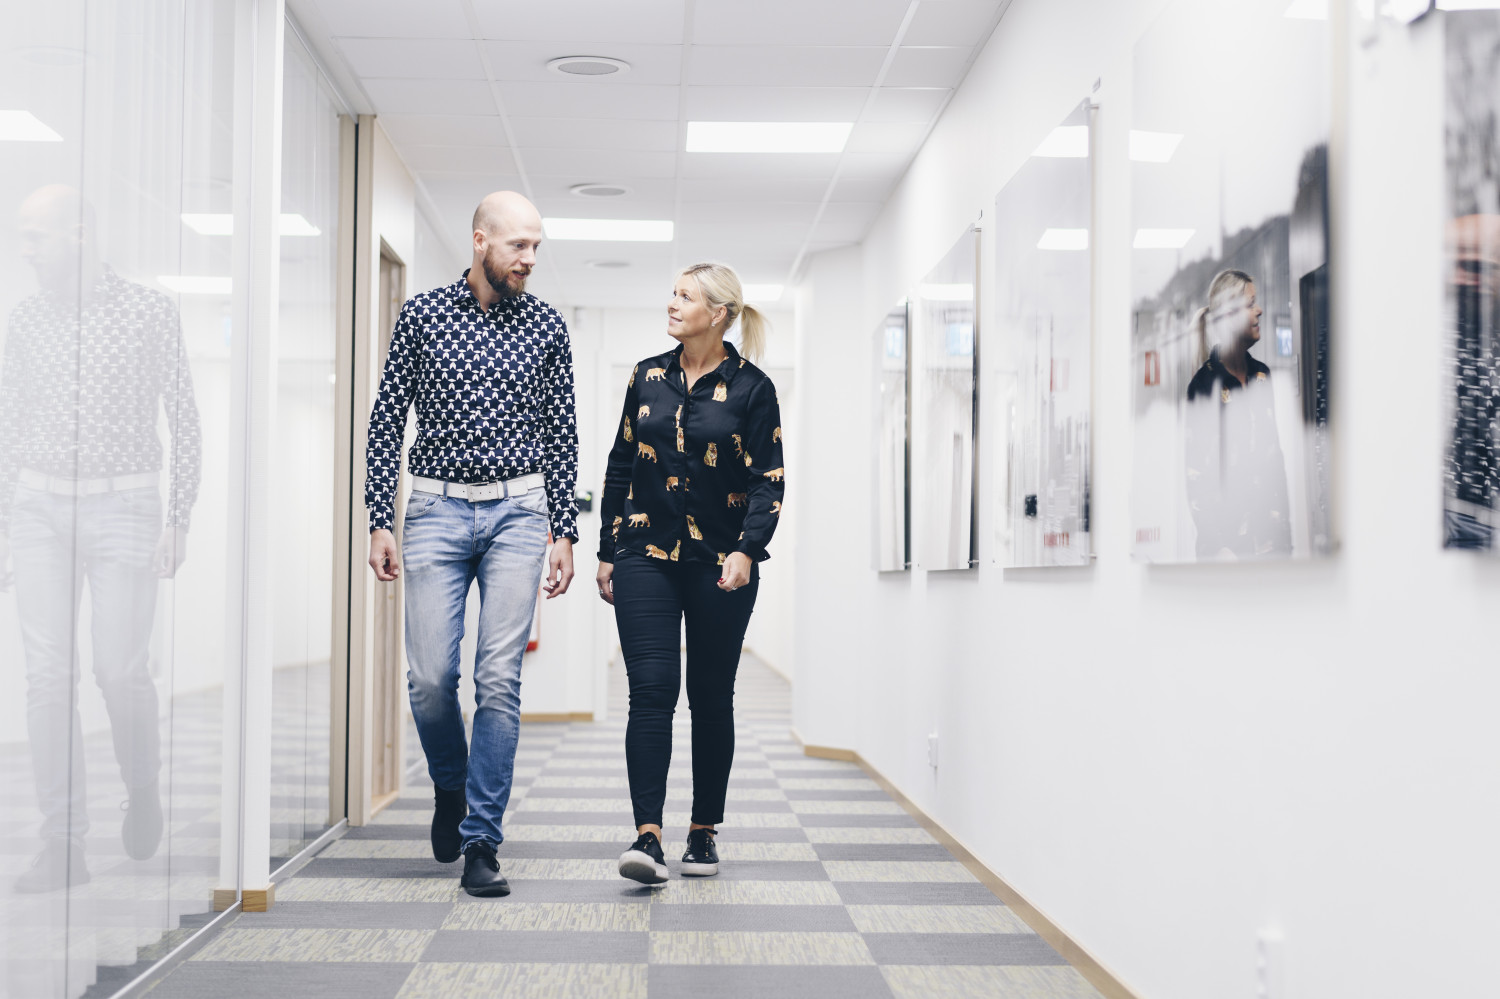 Two employees walk together in a corridor at Micropower